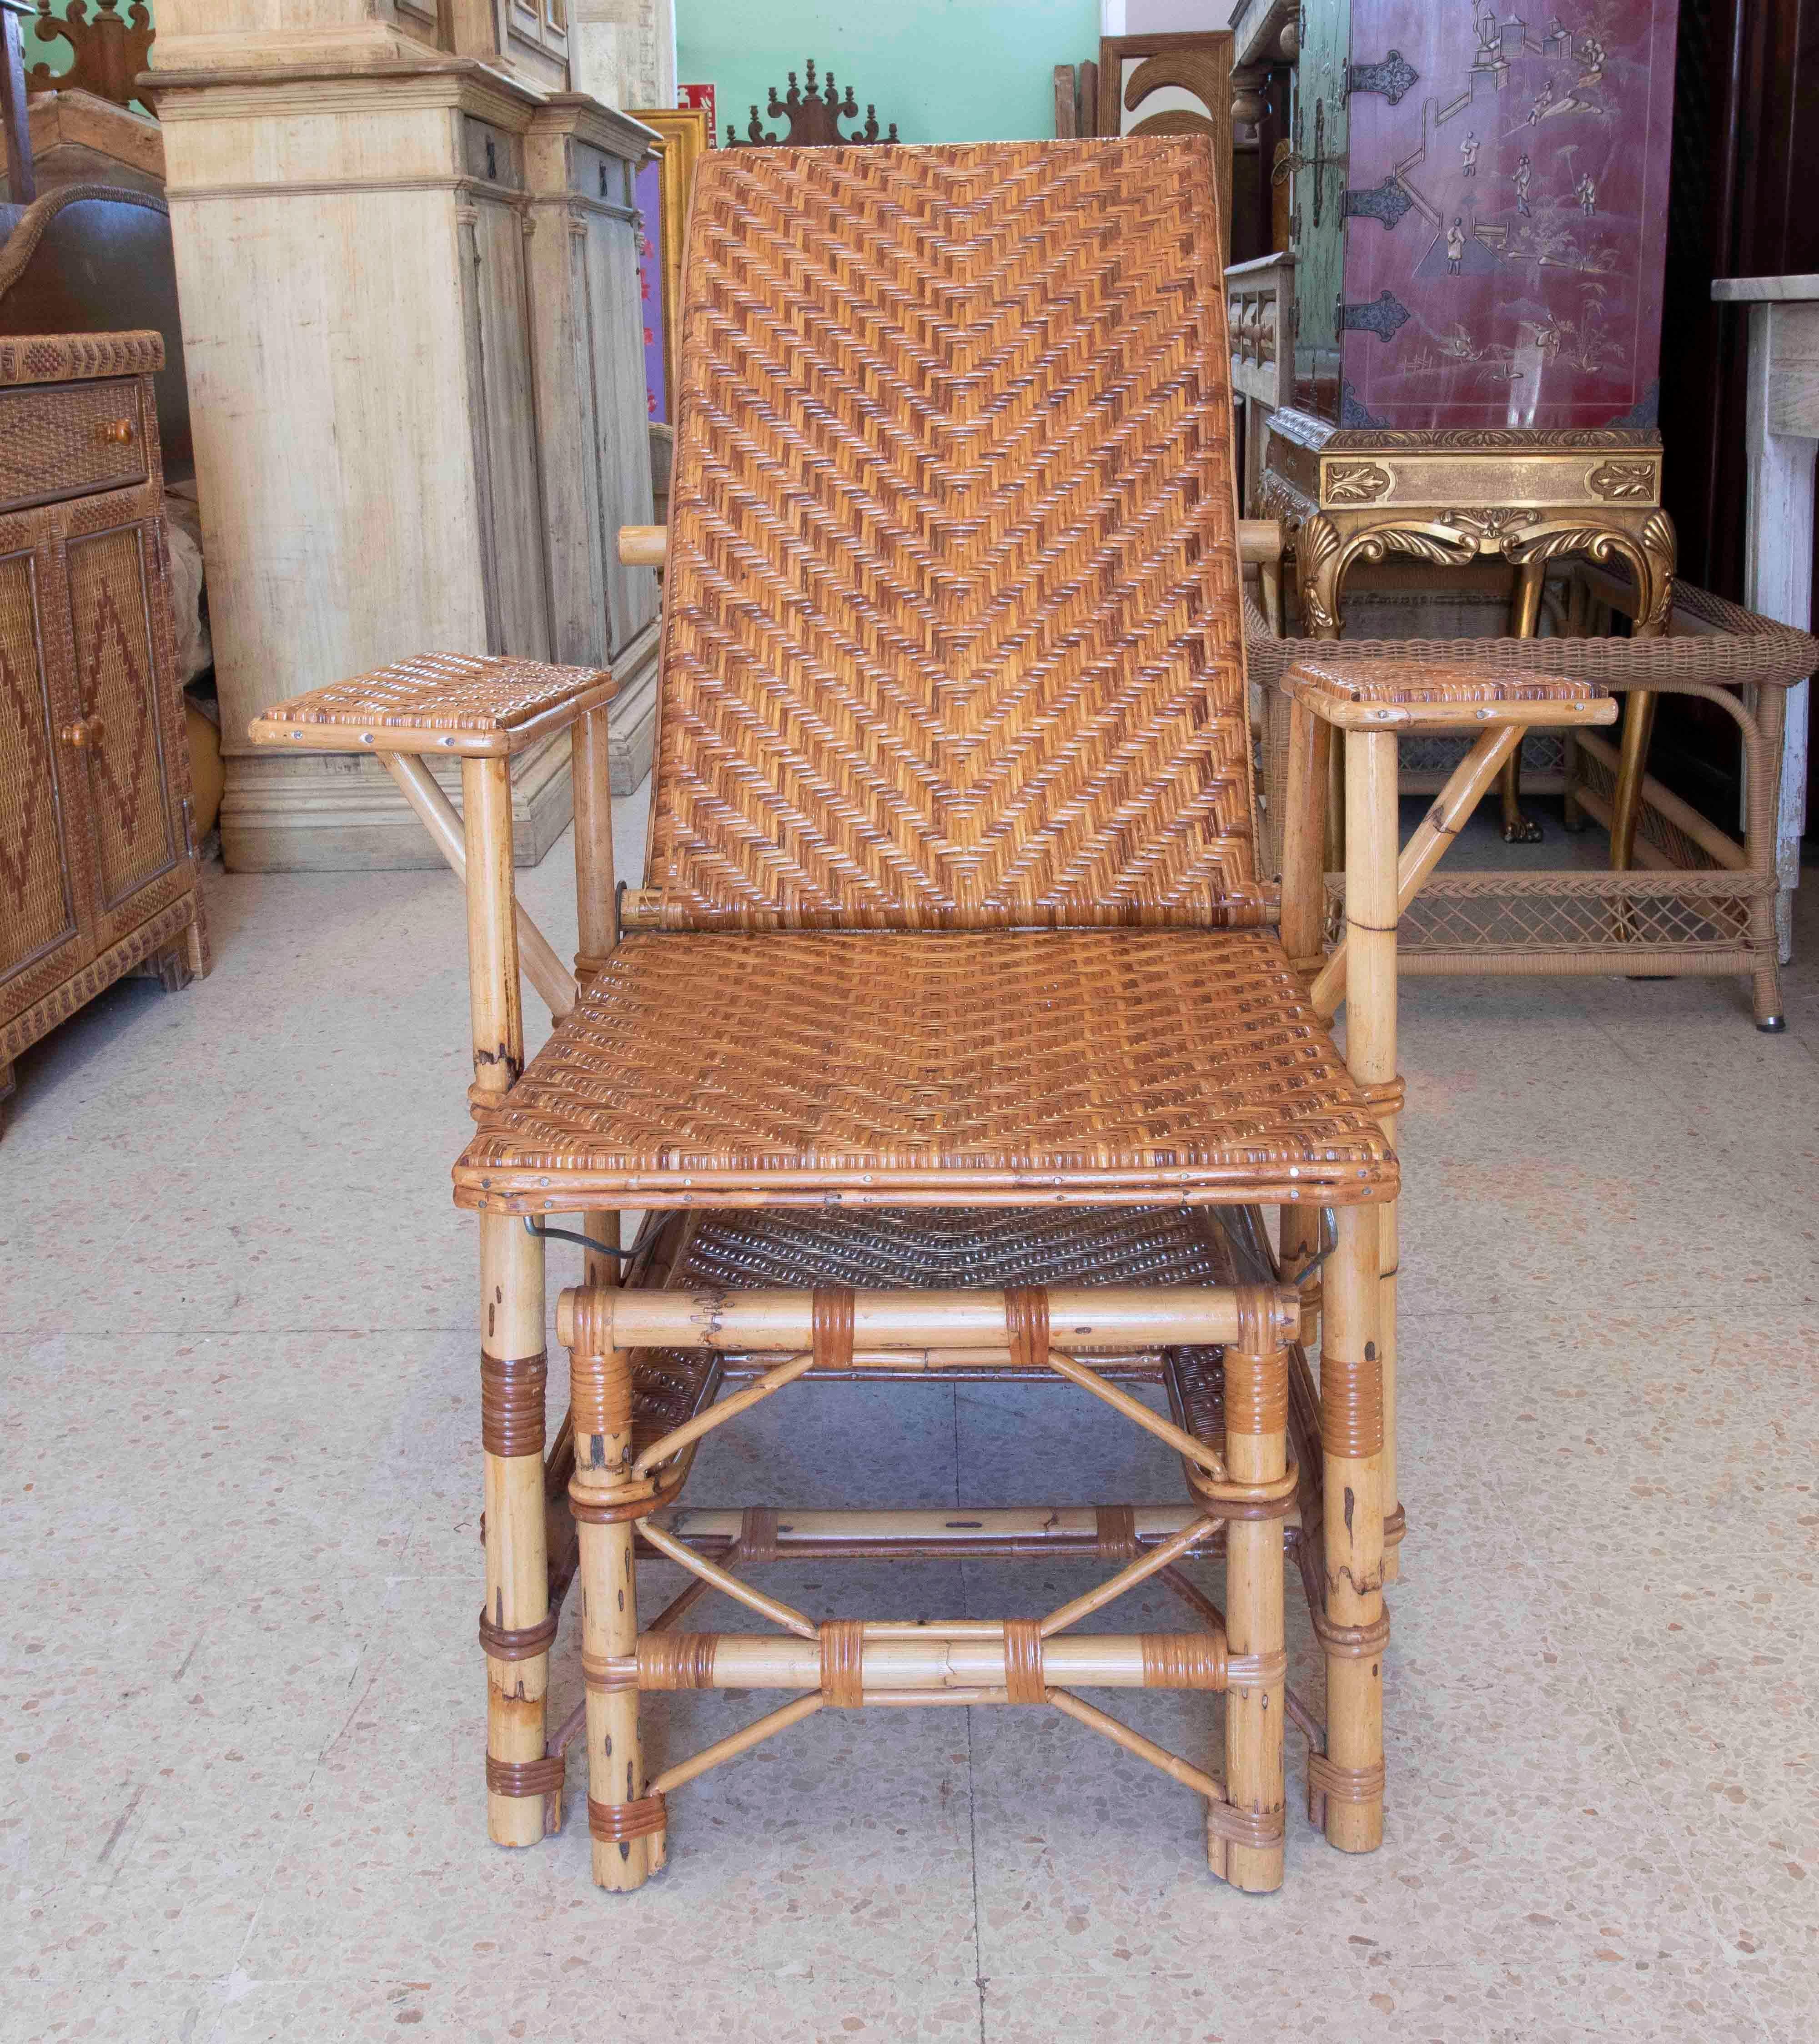 1970s Bamboo and Wicker Lounger Armchair with Footrest 
Measurements of the open armchair: 64x190x76cm